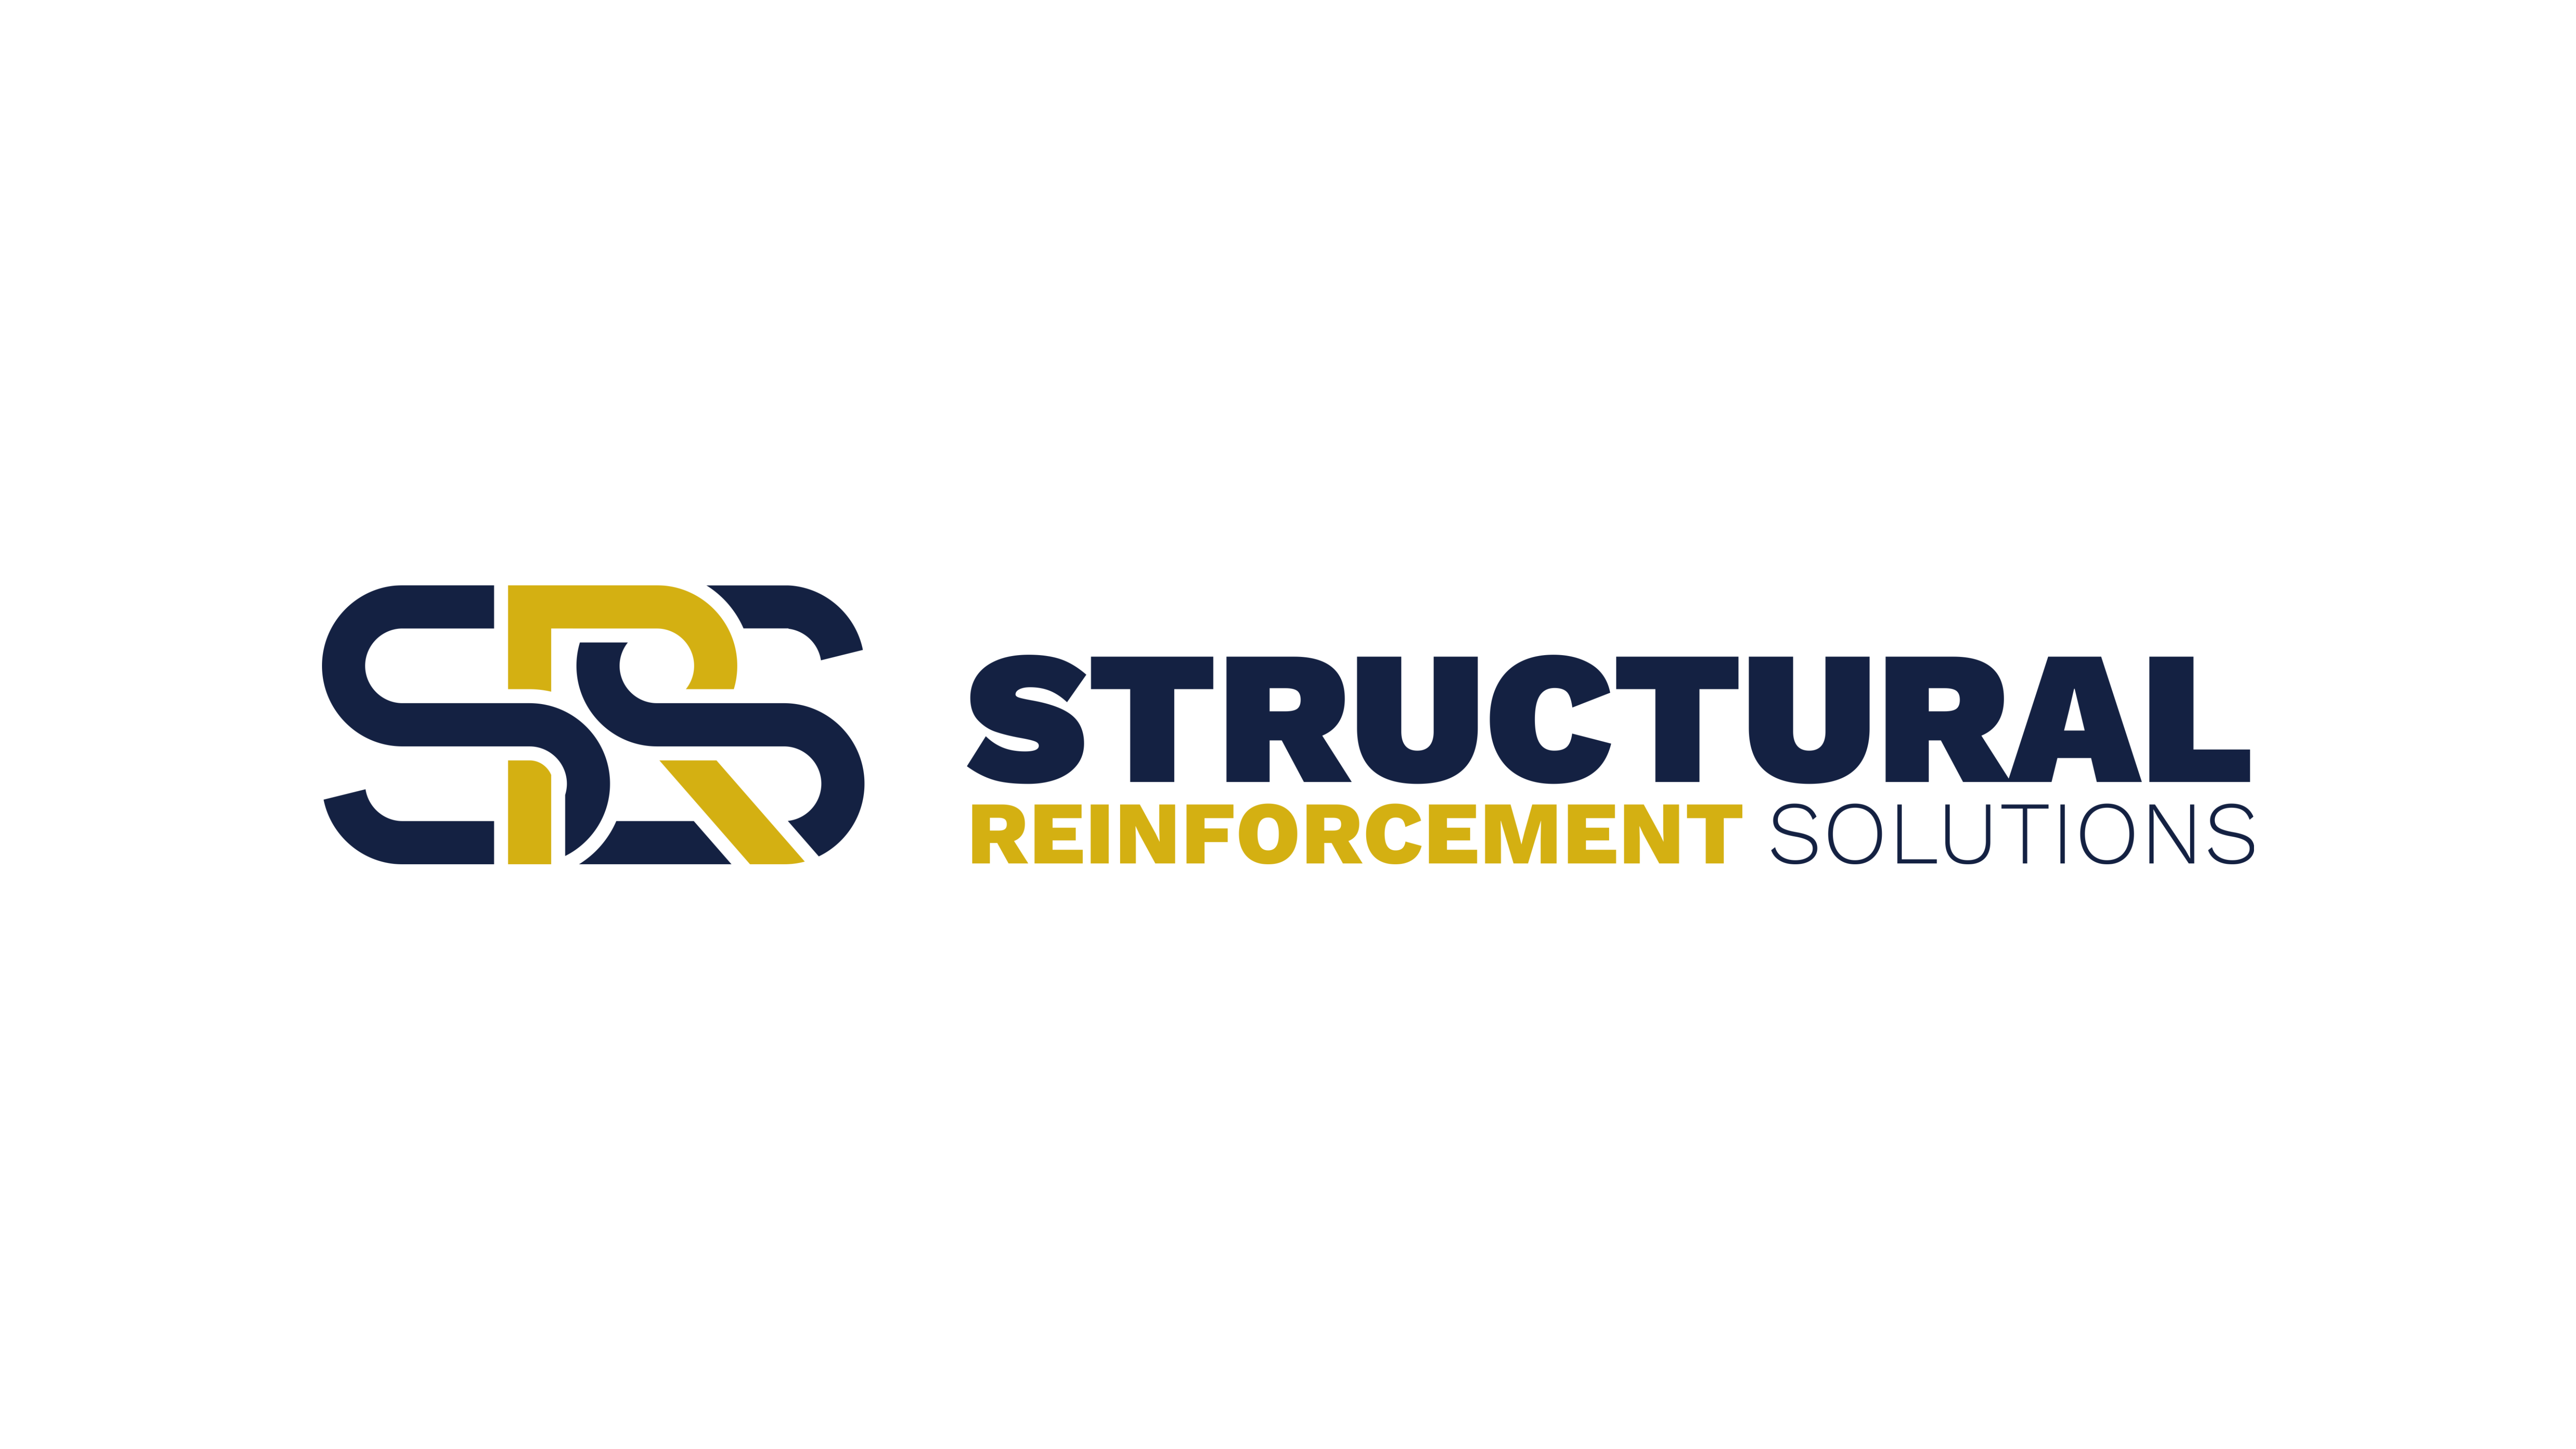 Foundation Repair and Construction Partner | Structural Reinforcement Solutions | Carbon Fiber Strengthening and Reinforcement Systems